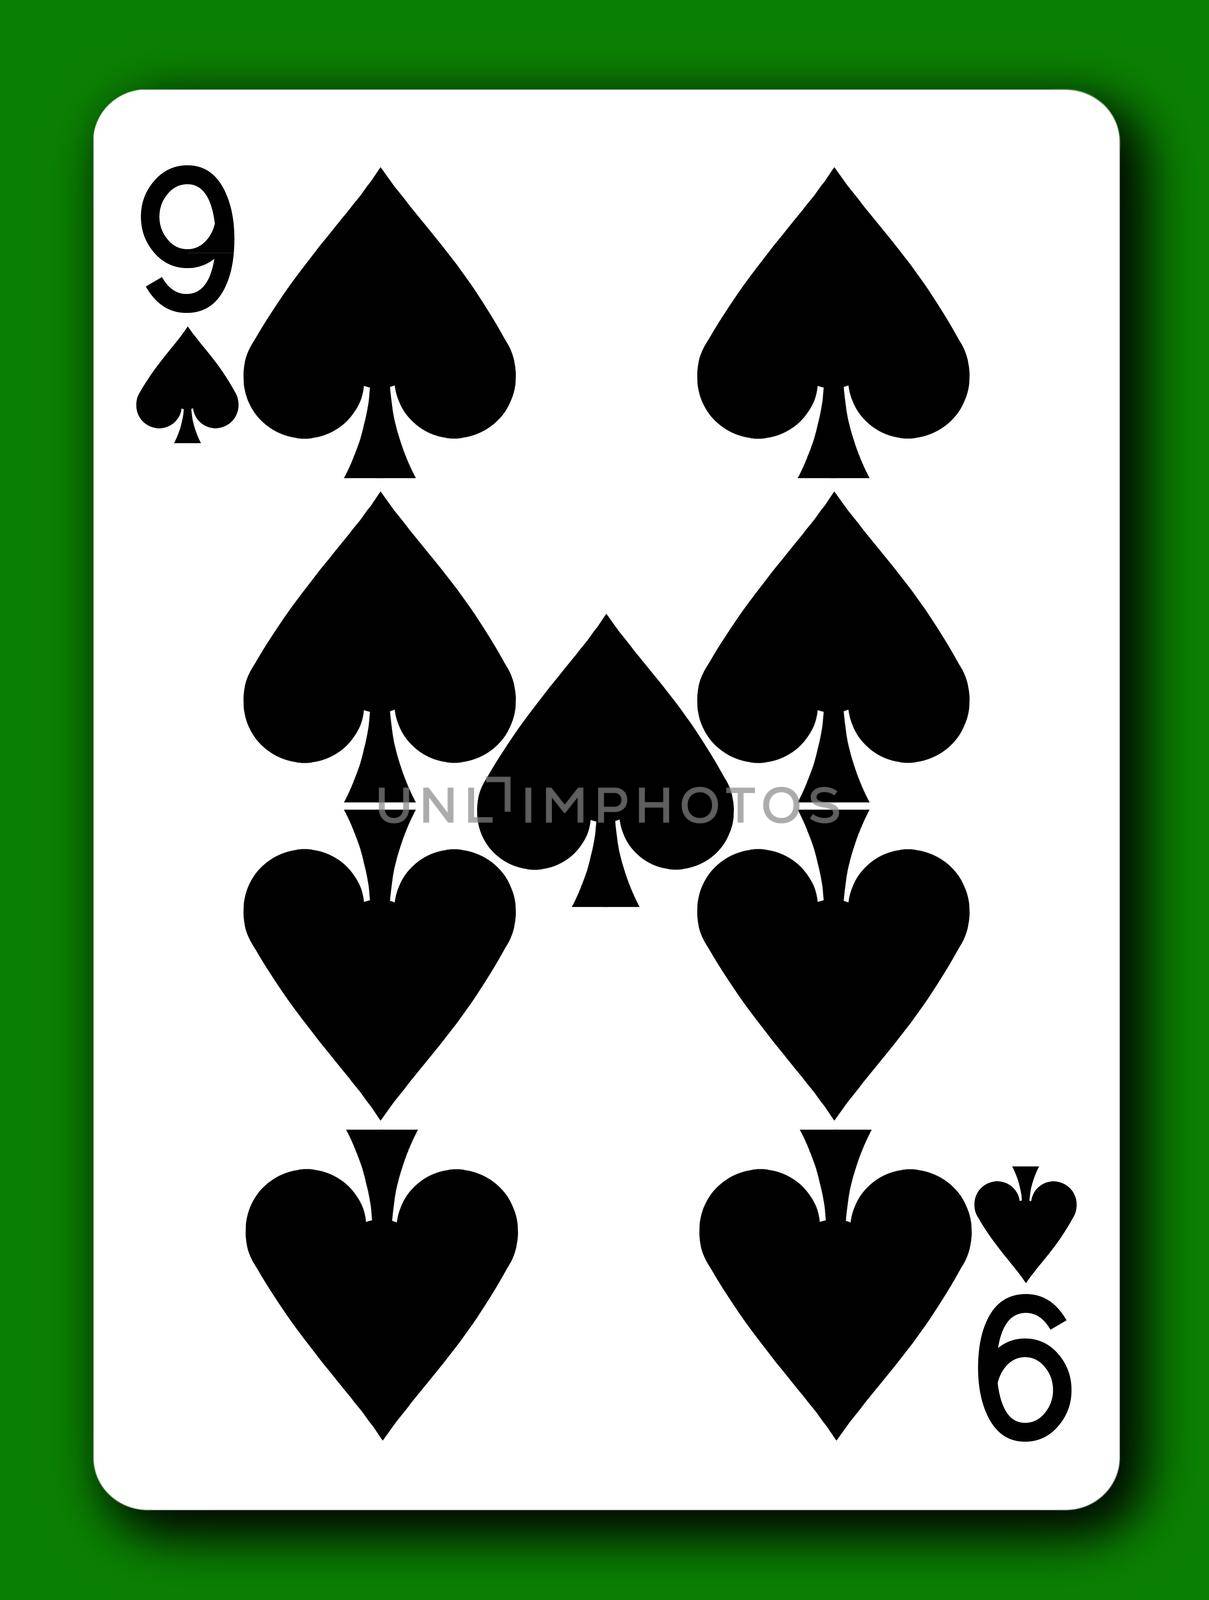 A 9 Nine of Spades playing card with clipping path to remove background and shadow 3d illustration